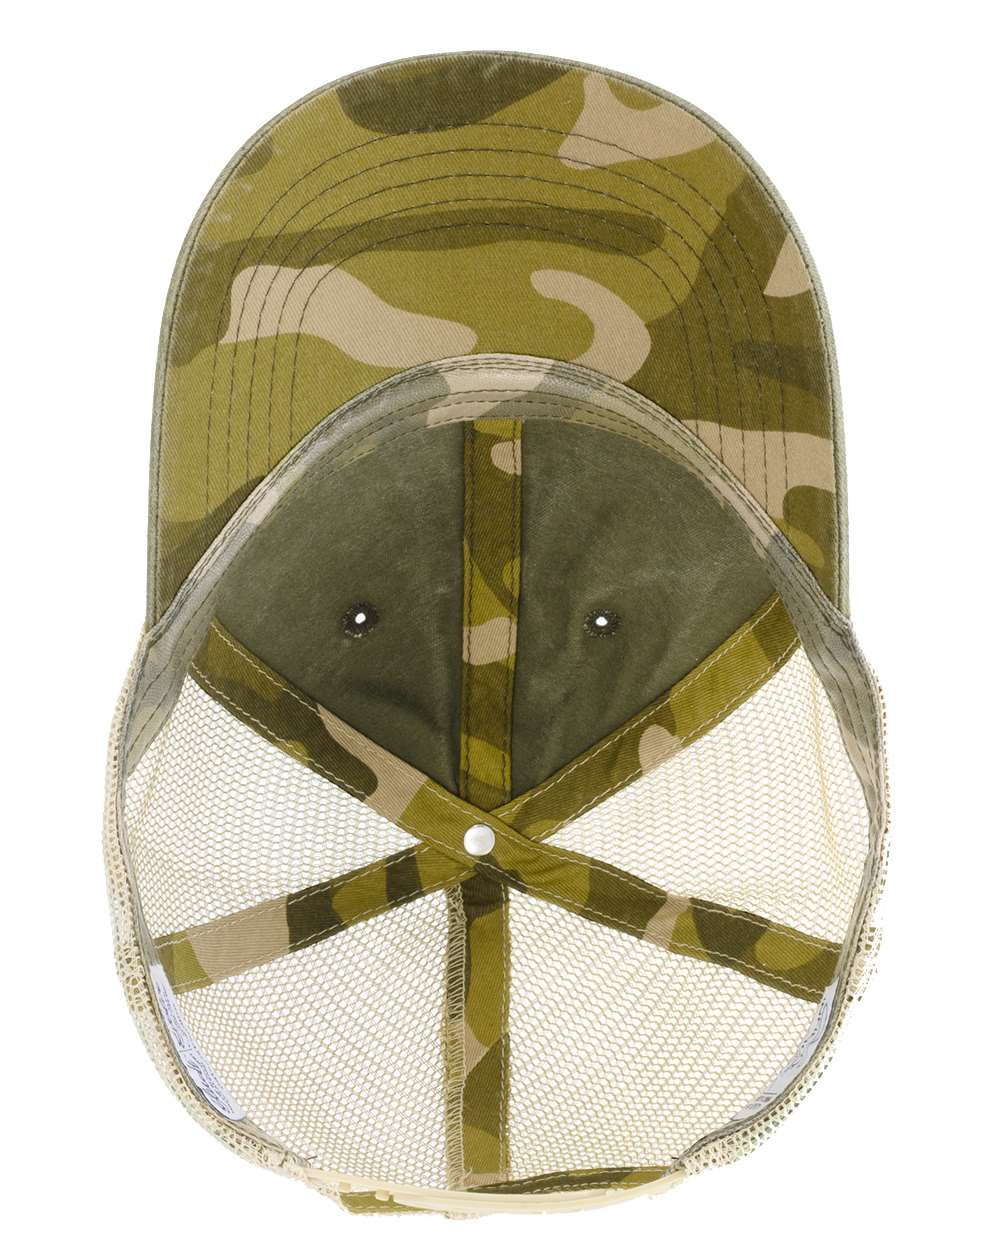 An embroidered olive camo ponytail hat adorned with "Montana Love," the perfect accessory for outdoor enthusiasts and state pride enthusiasts alike.